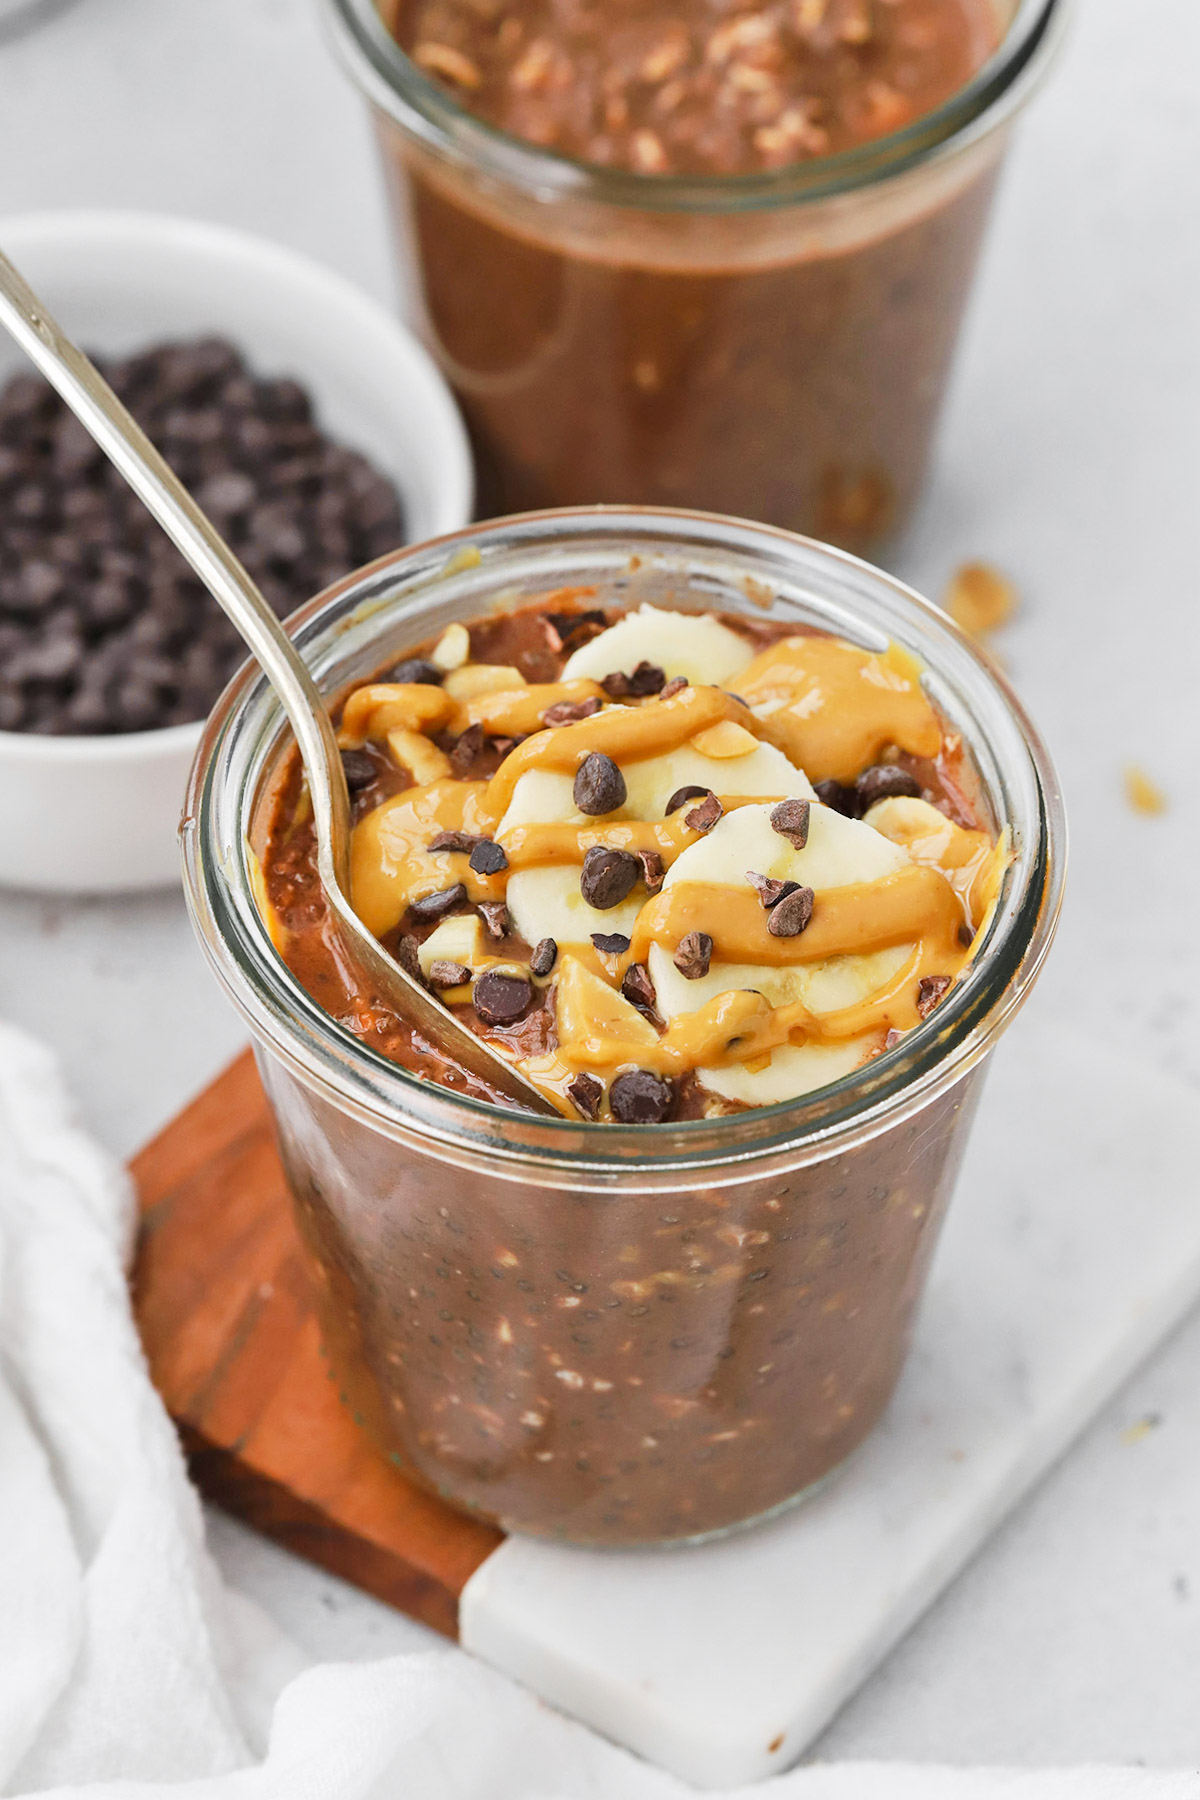 Front view of healthy chocolate peanut butter overnight oats with banana, peanut butter, and cacao nibs